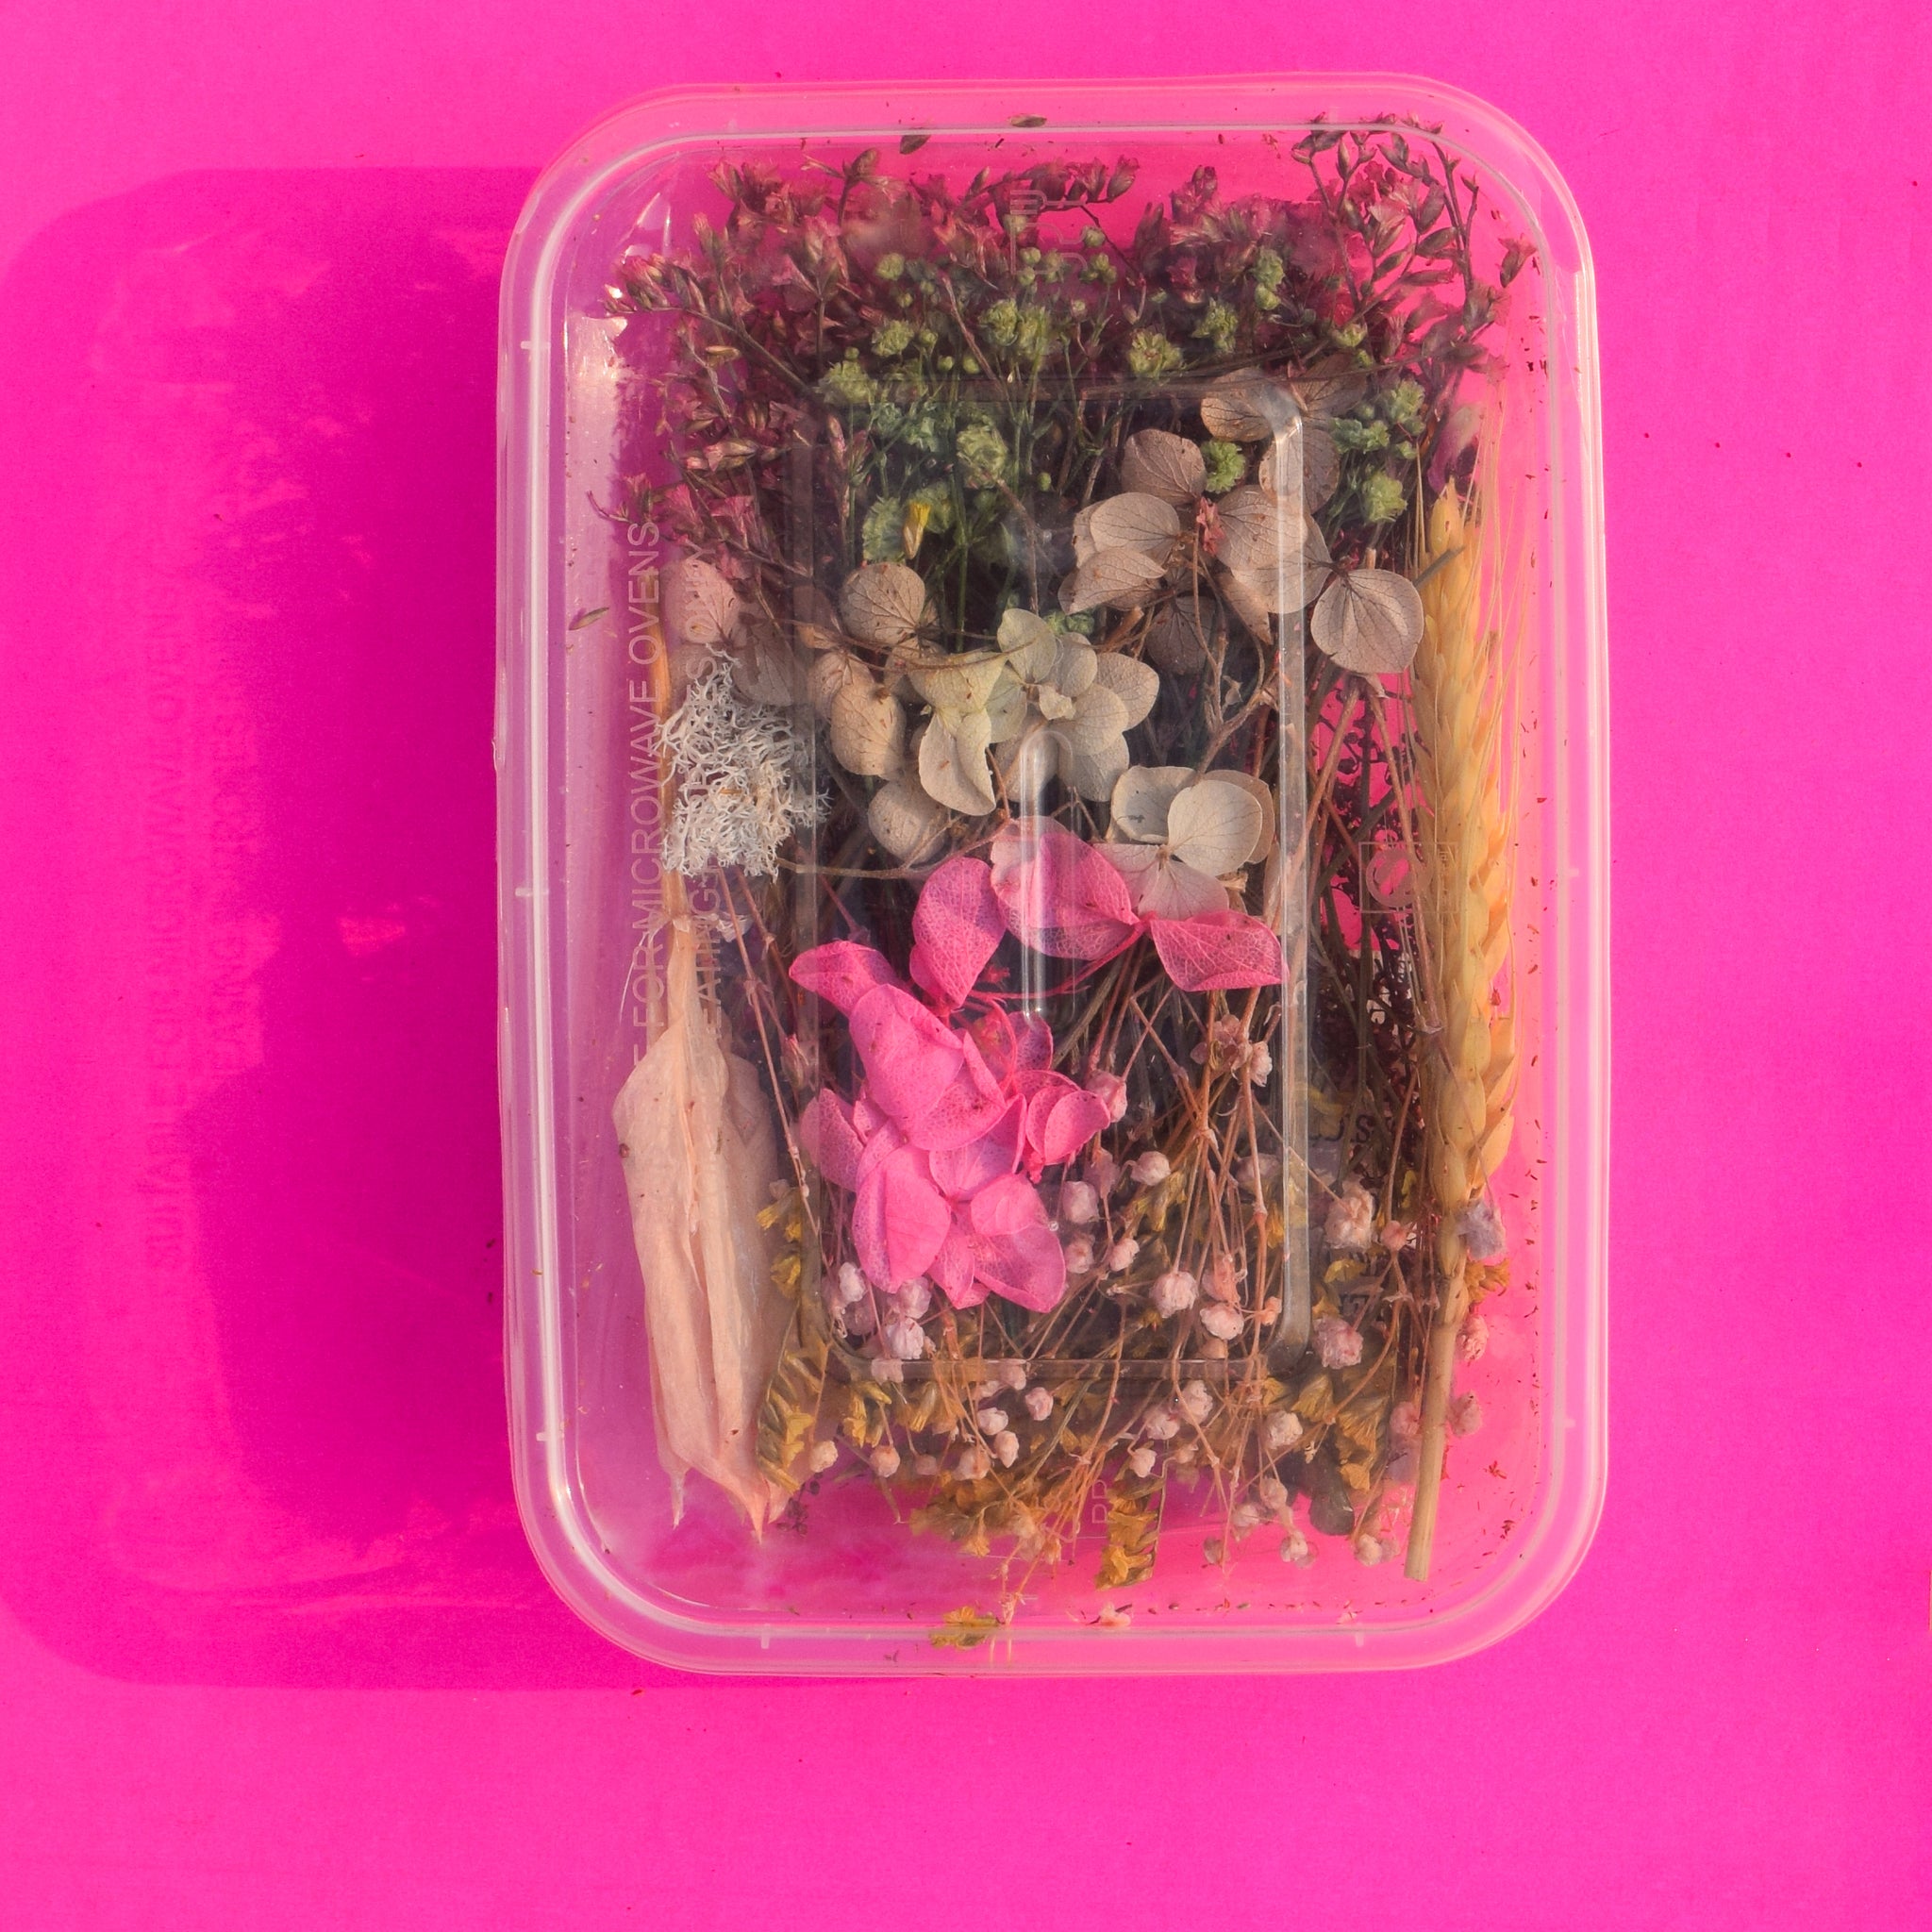 Dried flower - Pretty pink with greens